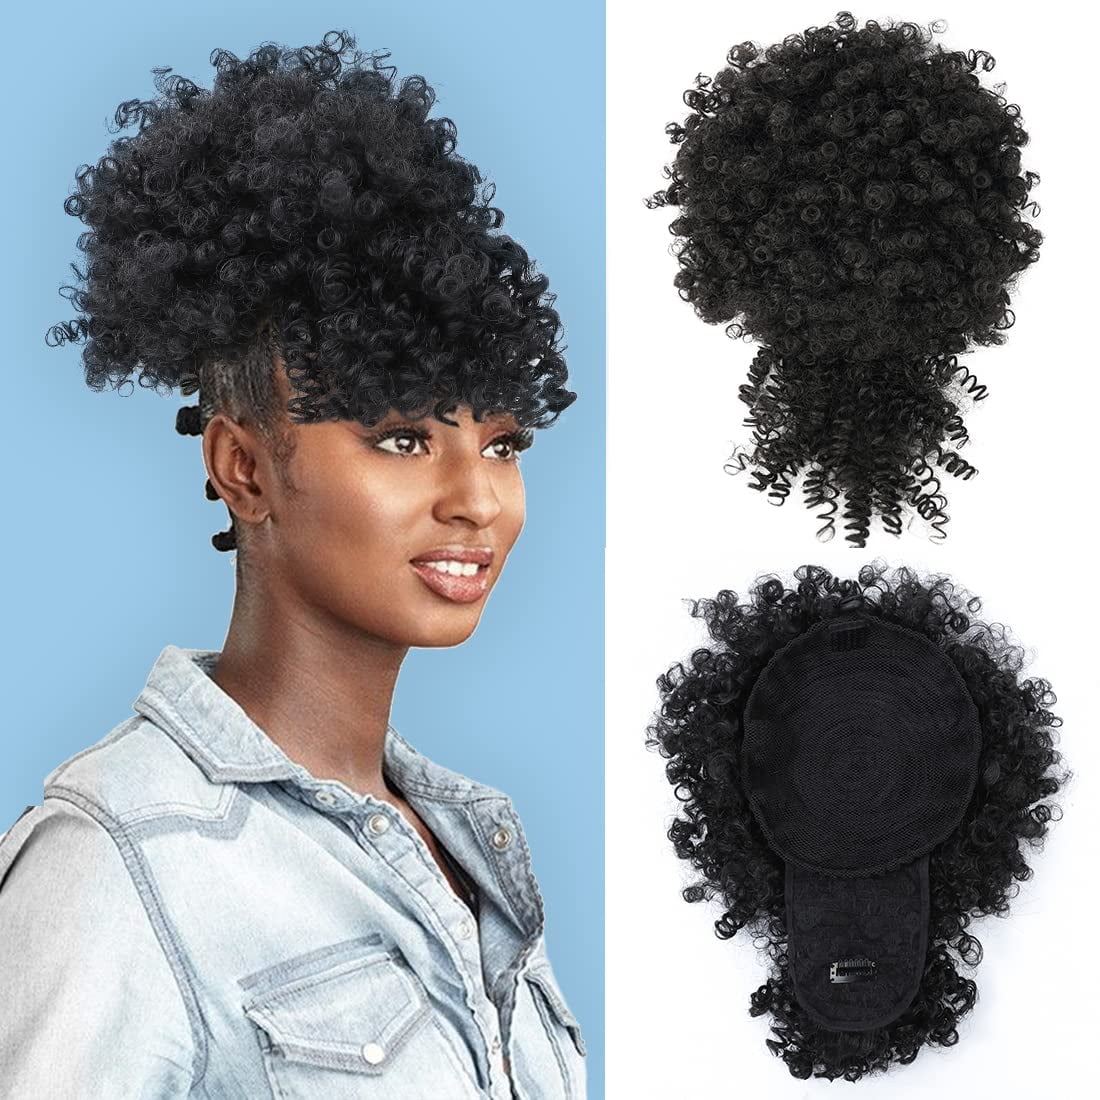 PIUIOLU Afro Puff Drawstring Ponytail with Curly Hair Clip in Bangs Short Natural  Hair Ponytail Extension for Black Women|(1B#) 